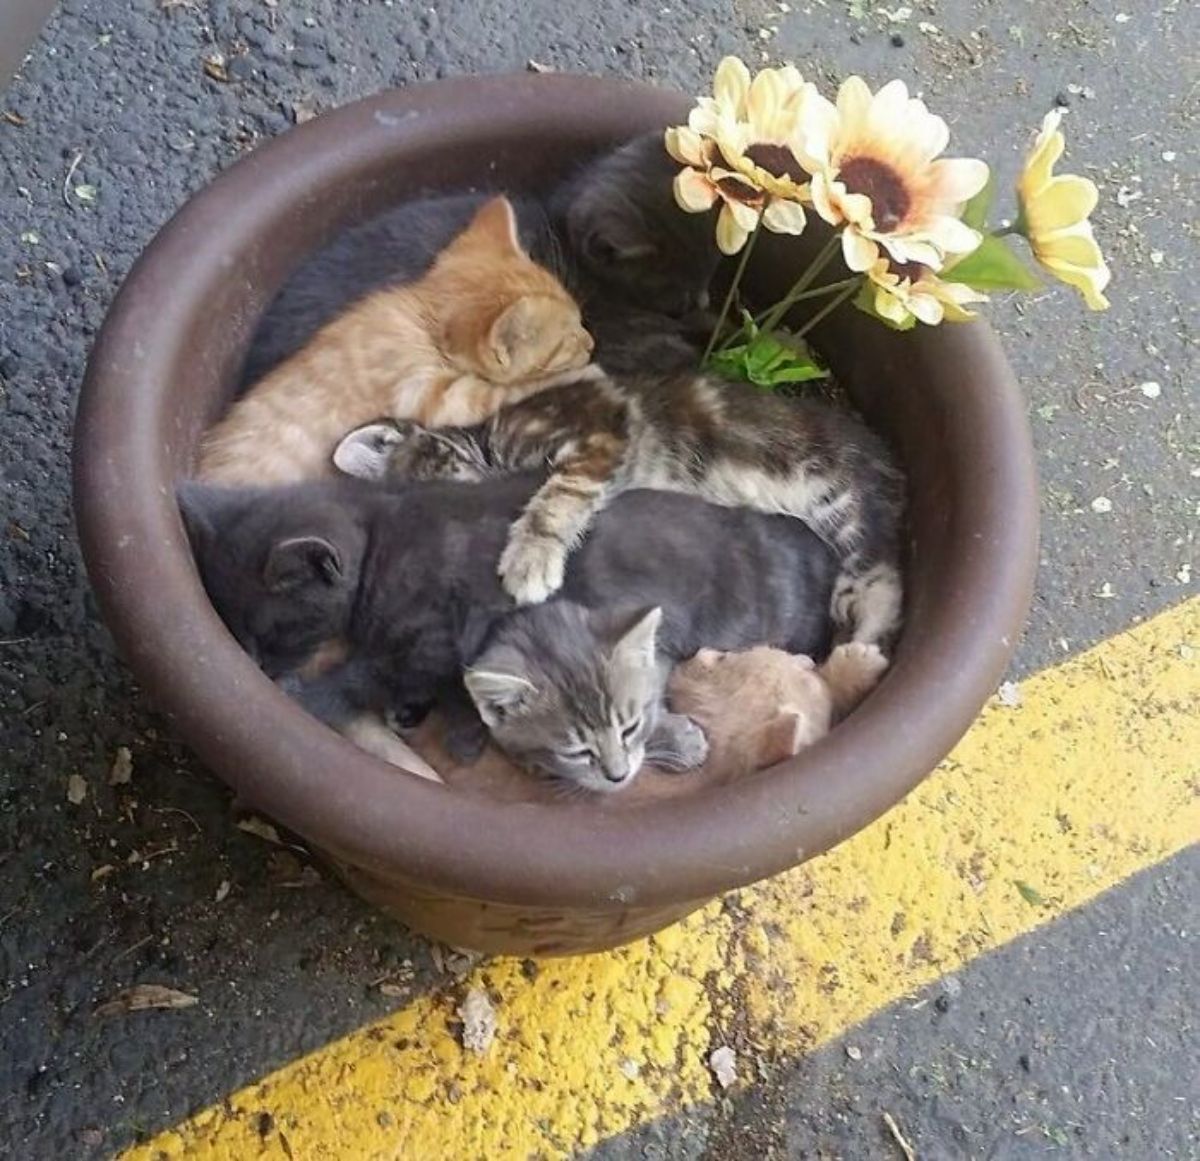 2 orange kittens 2 black kittens and 2 brown tabby kittens sleeping in a brown pot with sunflowers growing out of it